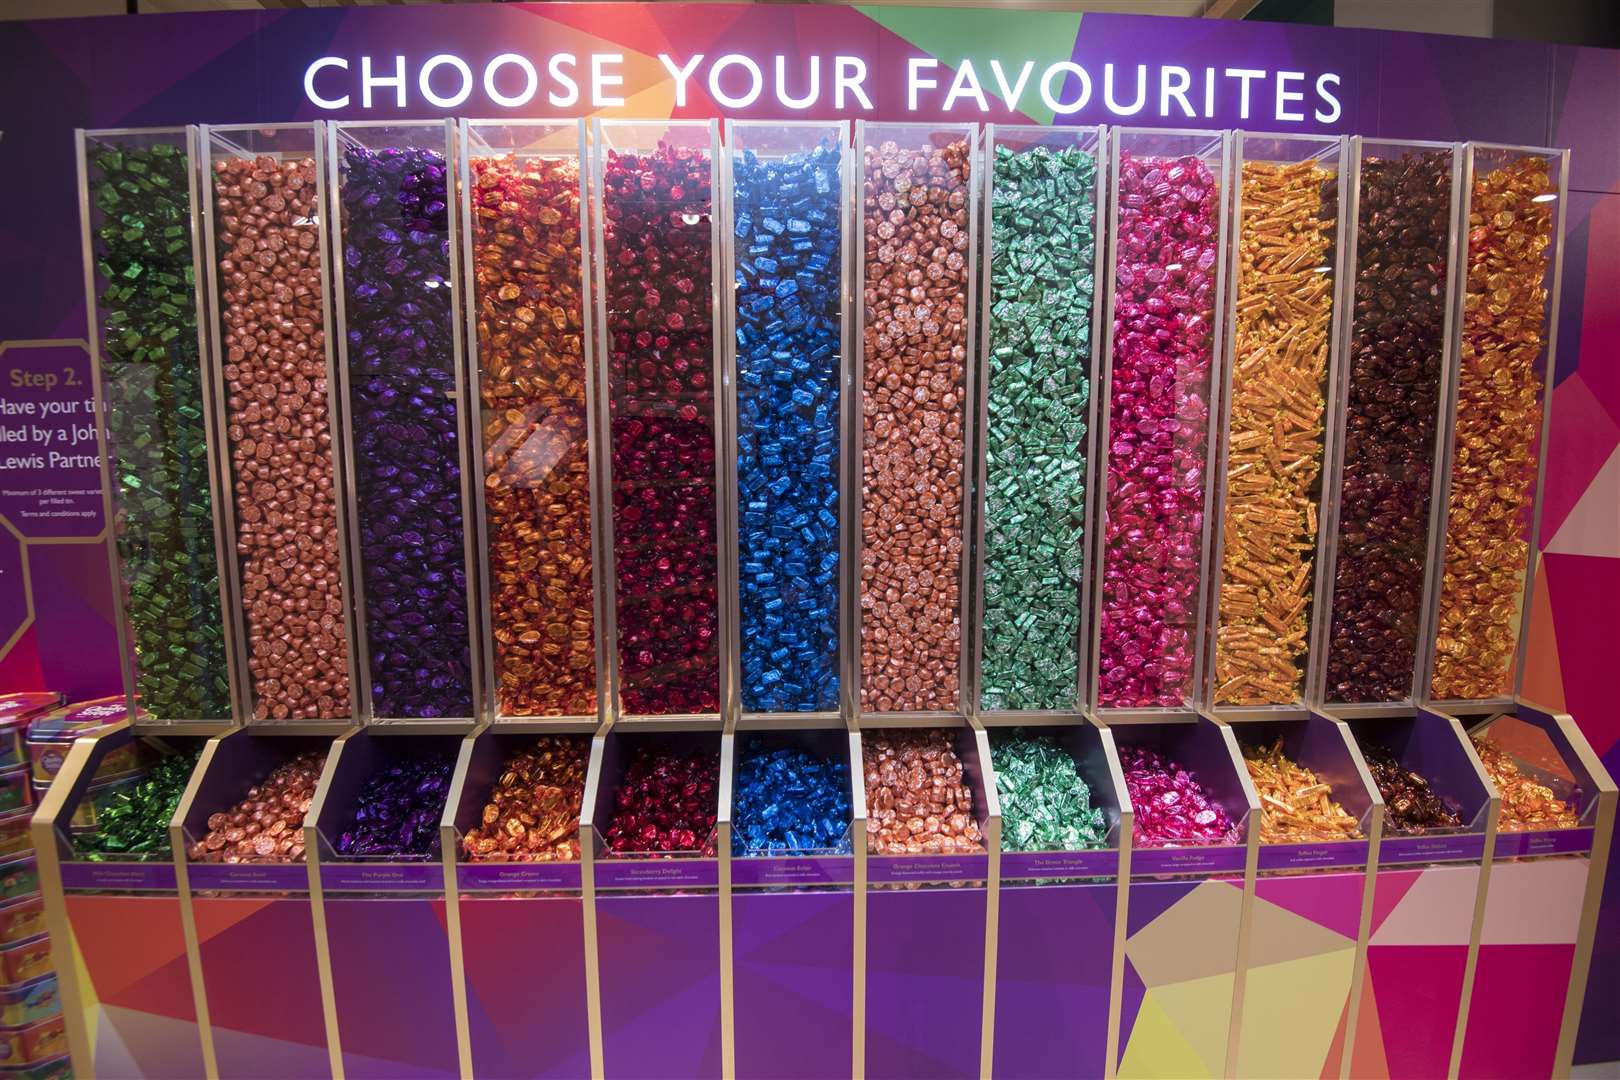 Quality Street now allow you to choose your favourites